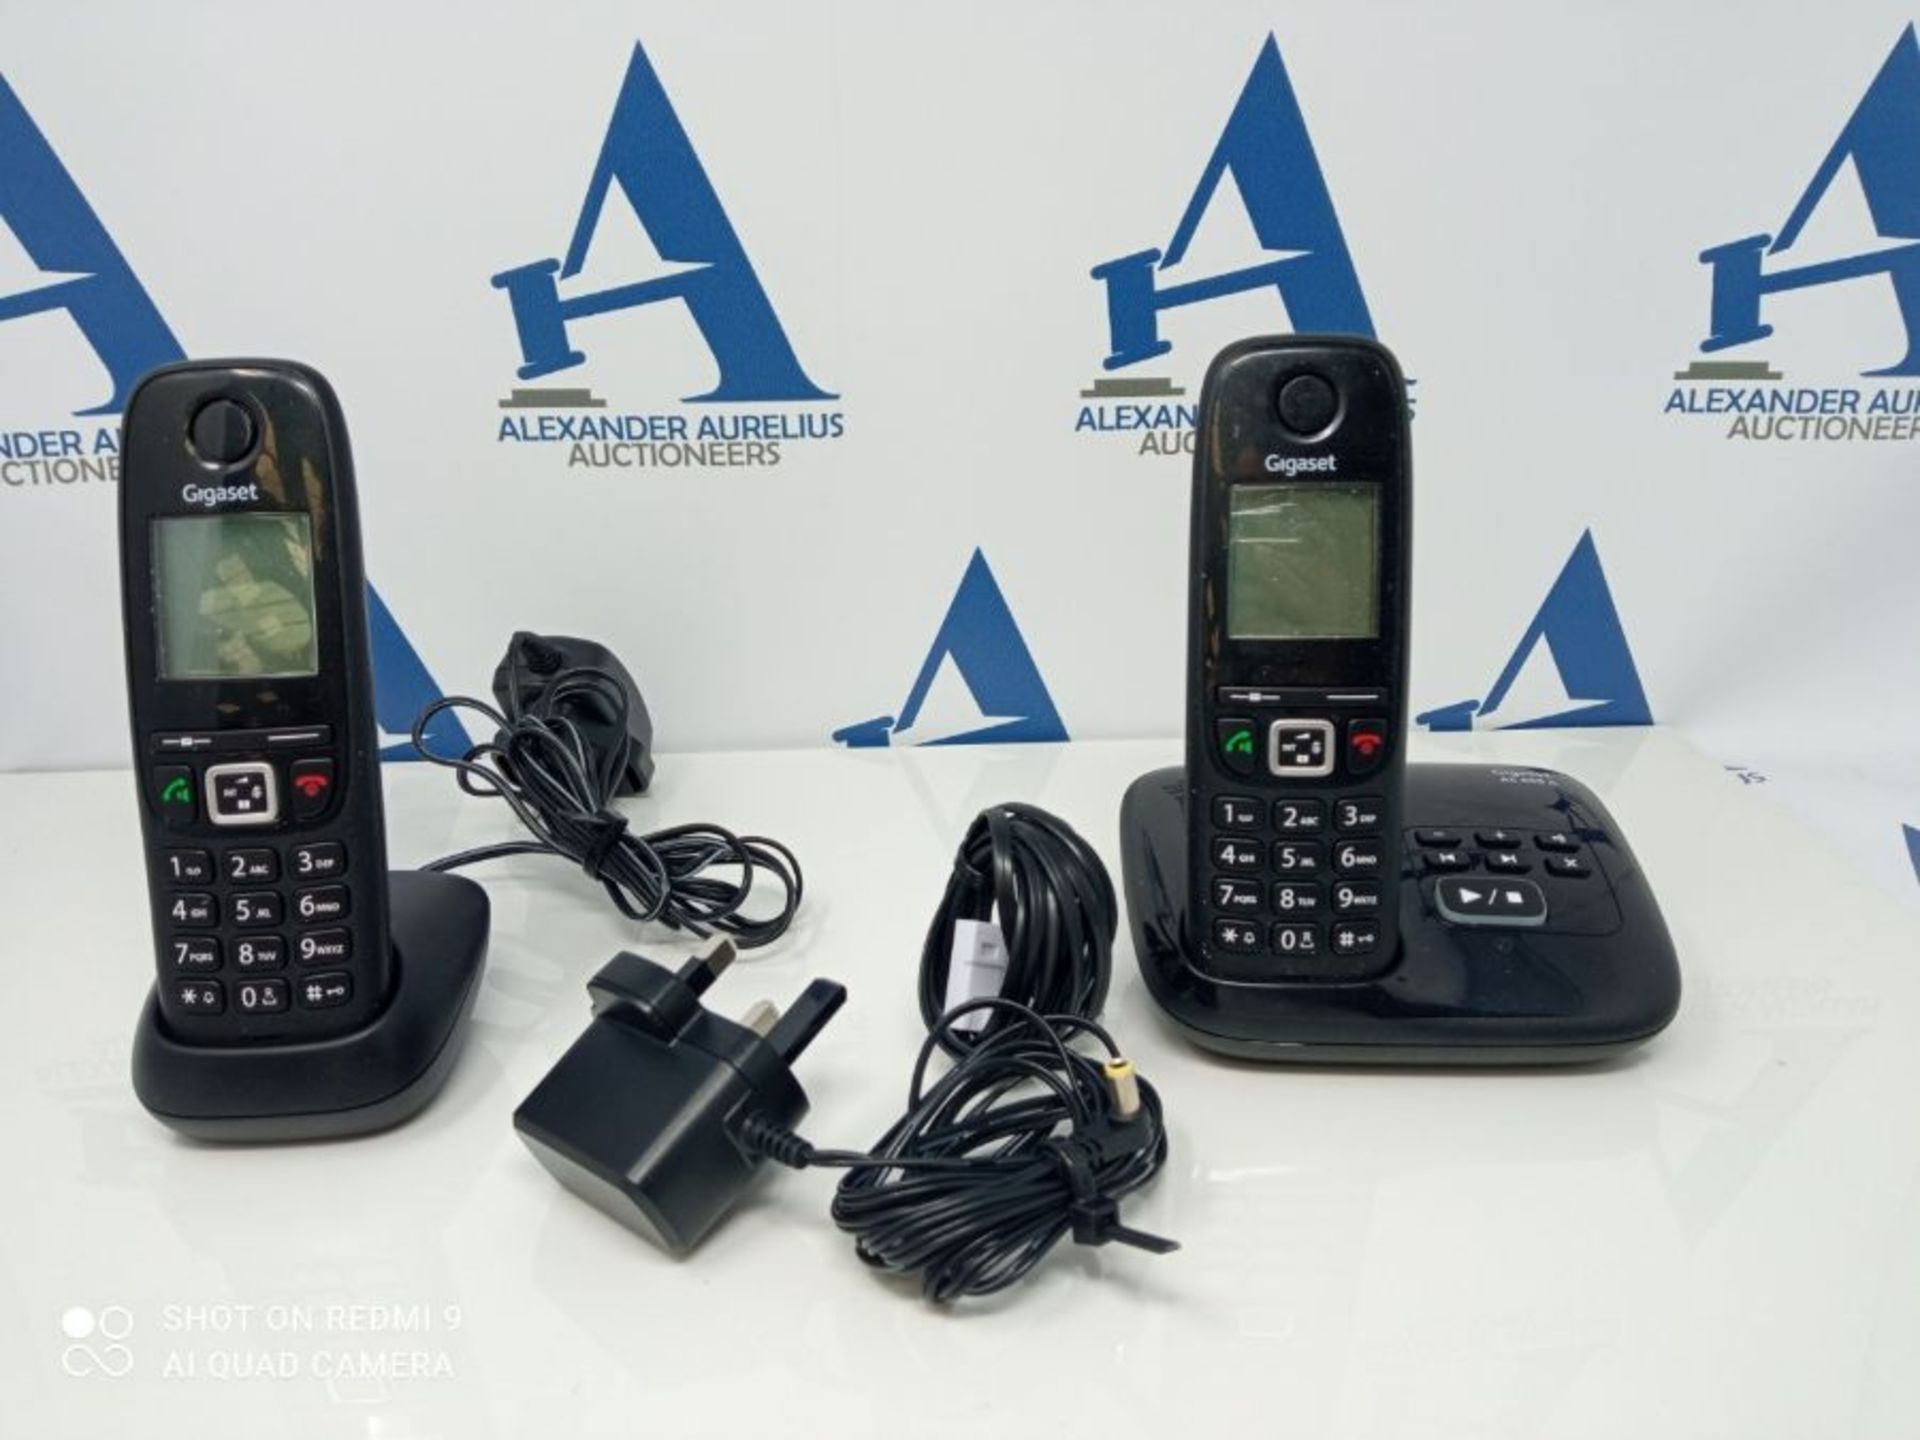 Gigaset AS405A DUO - Advanced Cordless Home Phone with Answer Machine and Nuisance Cal - Image 3 of 3